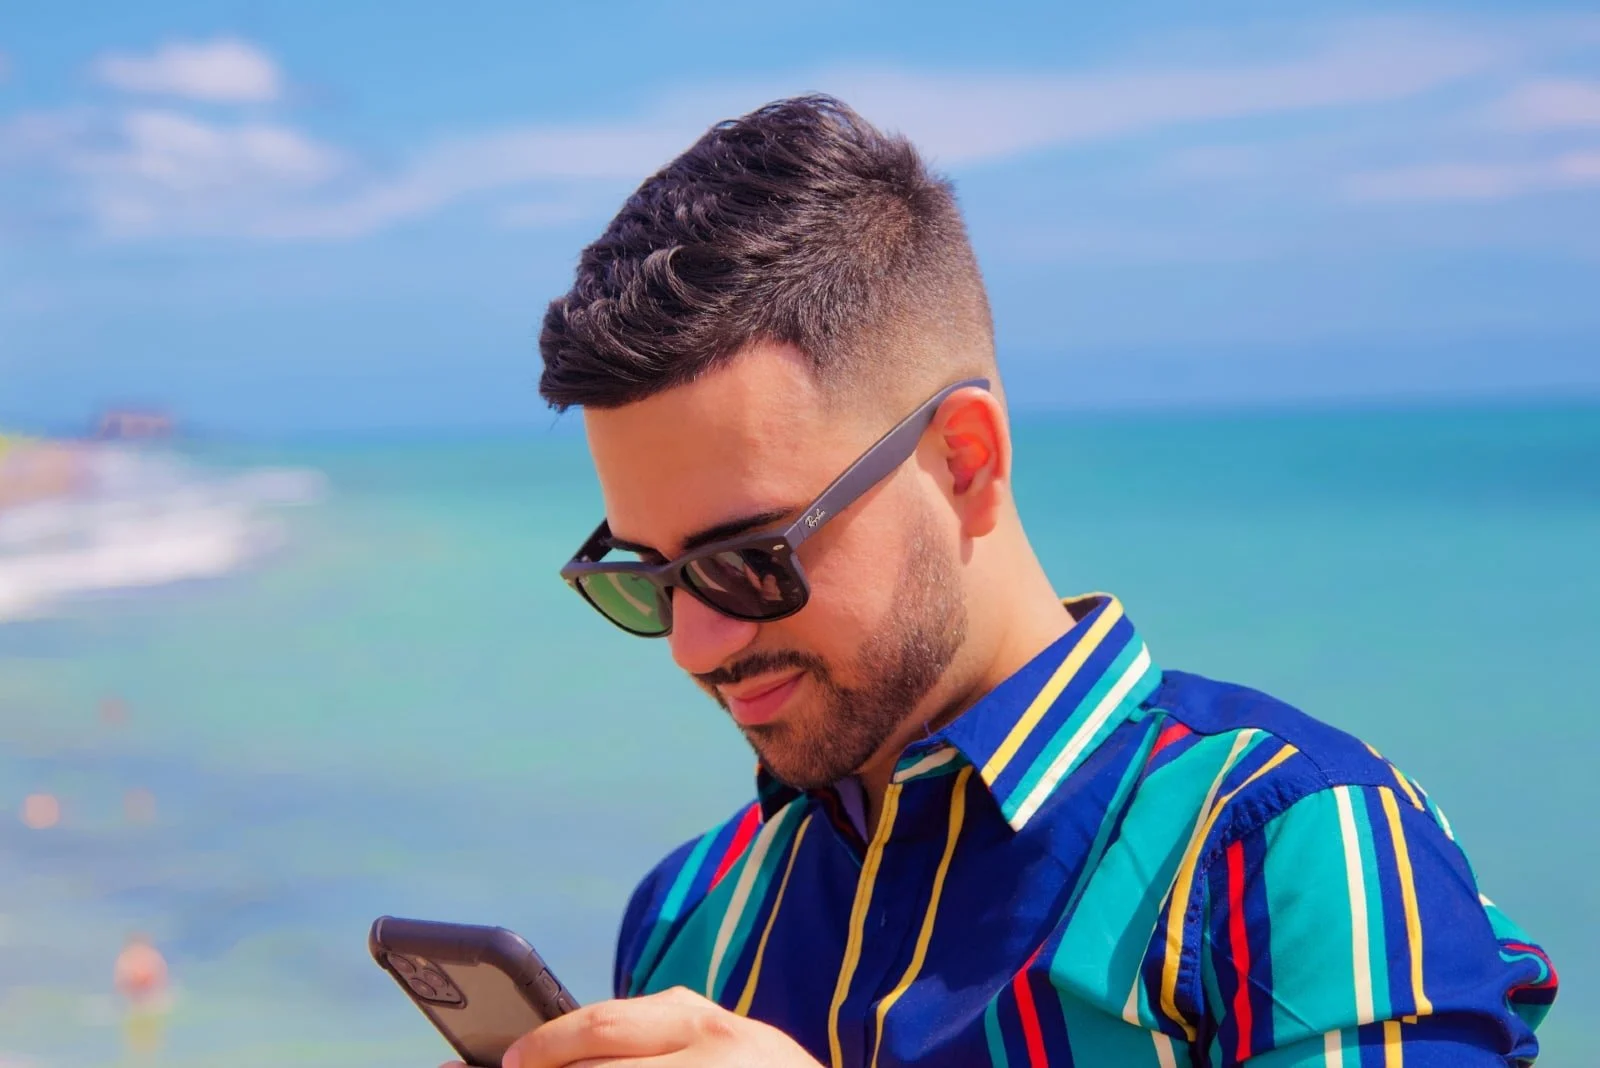 man looking at phone while standing near sea